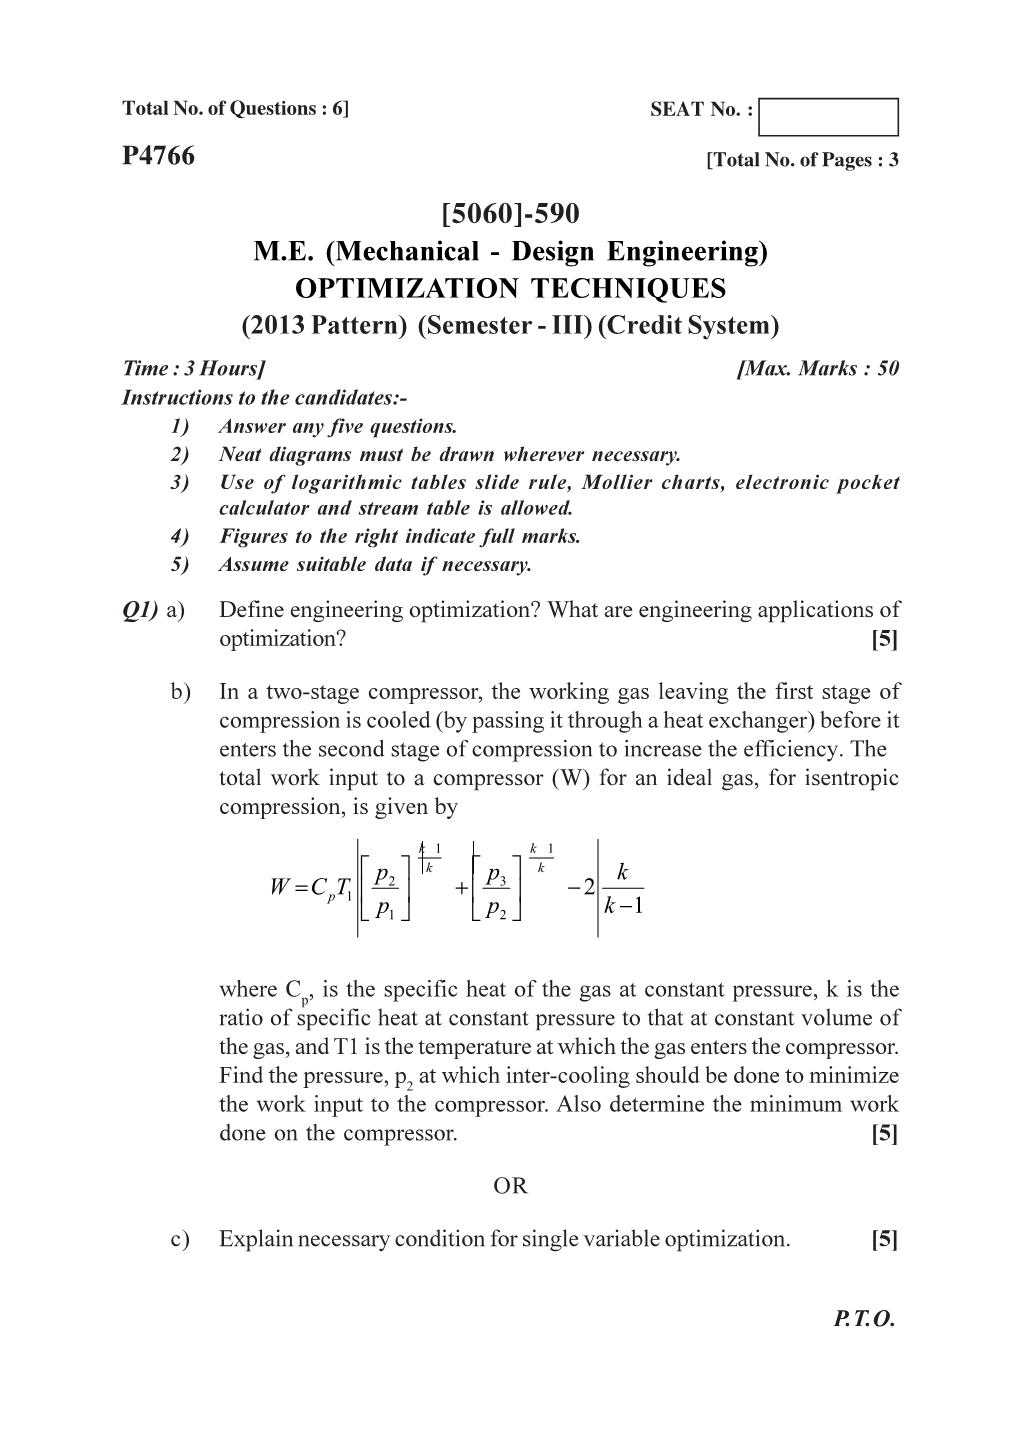 (Mechanical - Design Engineering) OPTIMIZATION TECHNIQUES (2013 Pattern) (Semester - III) (Credit System) Time : 3 Hours] [Max